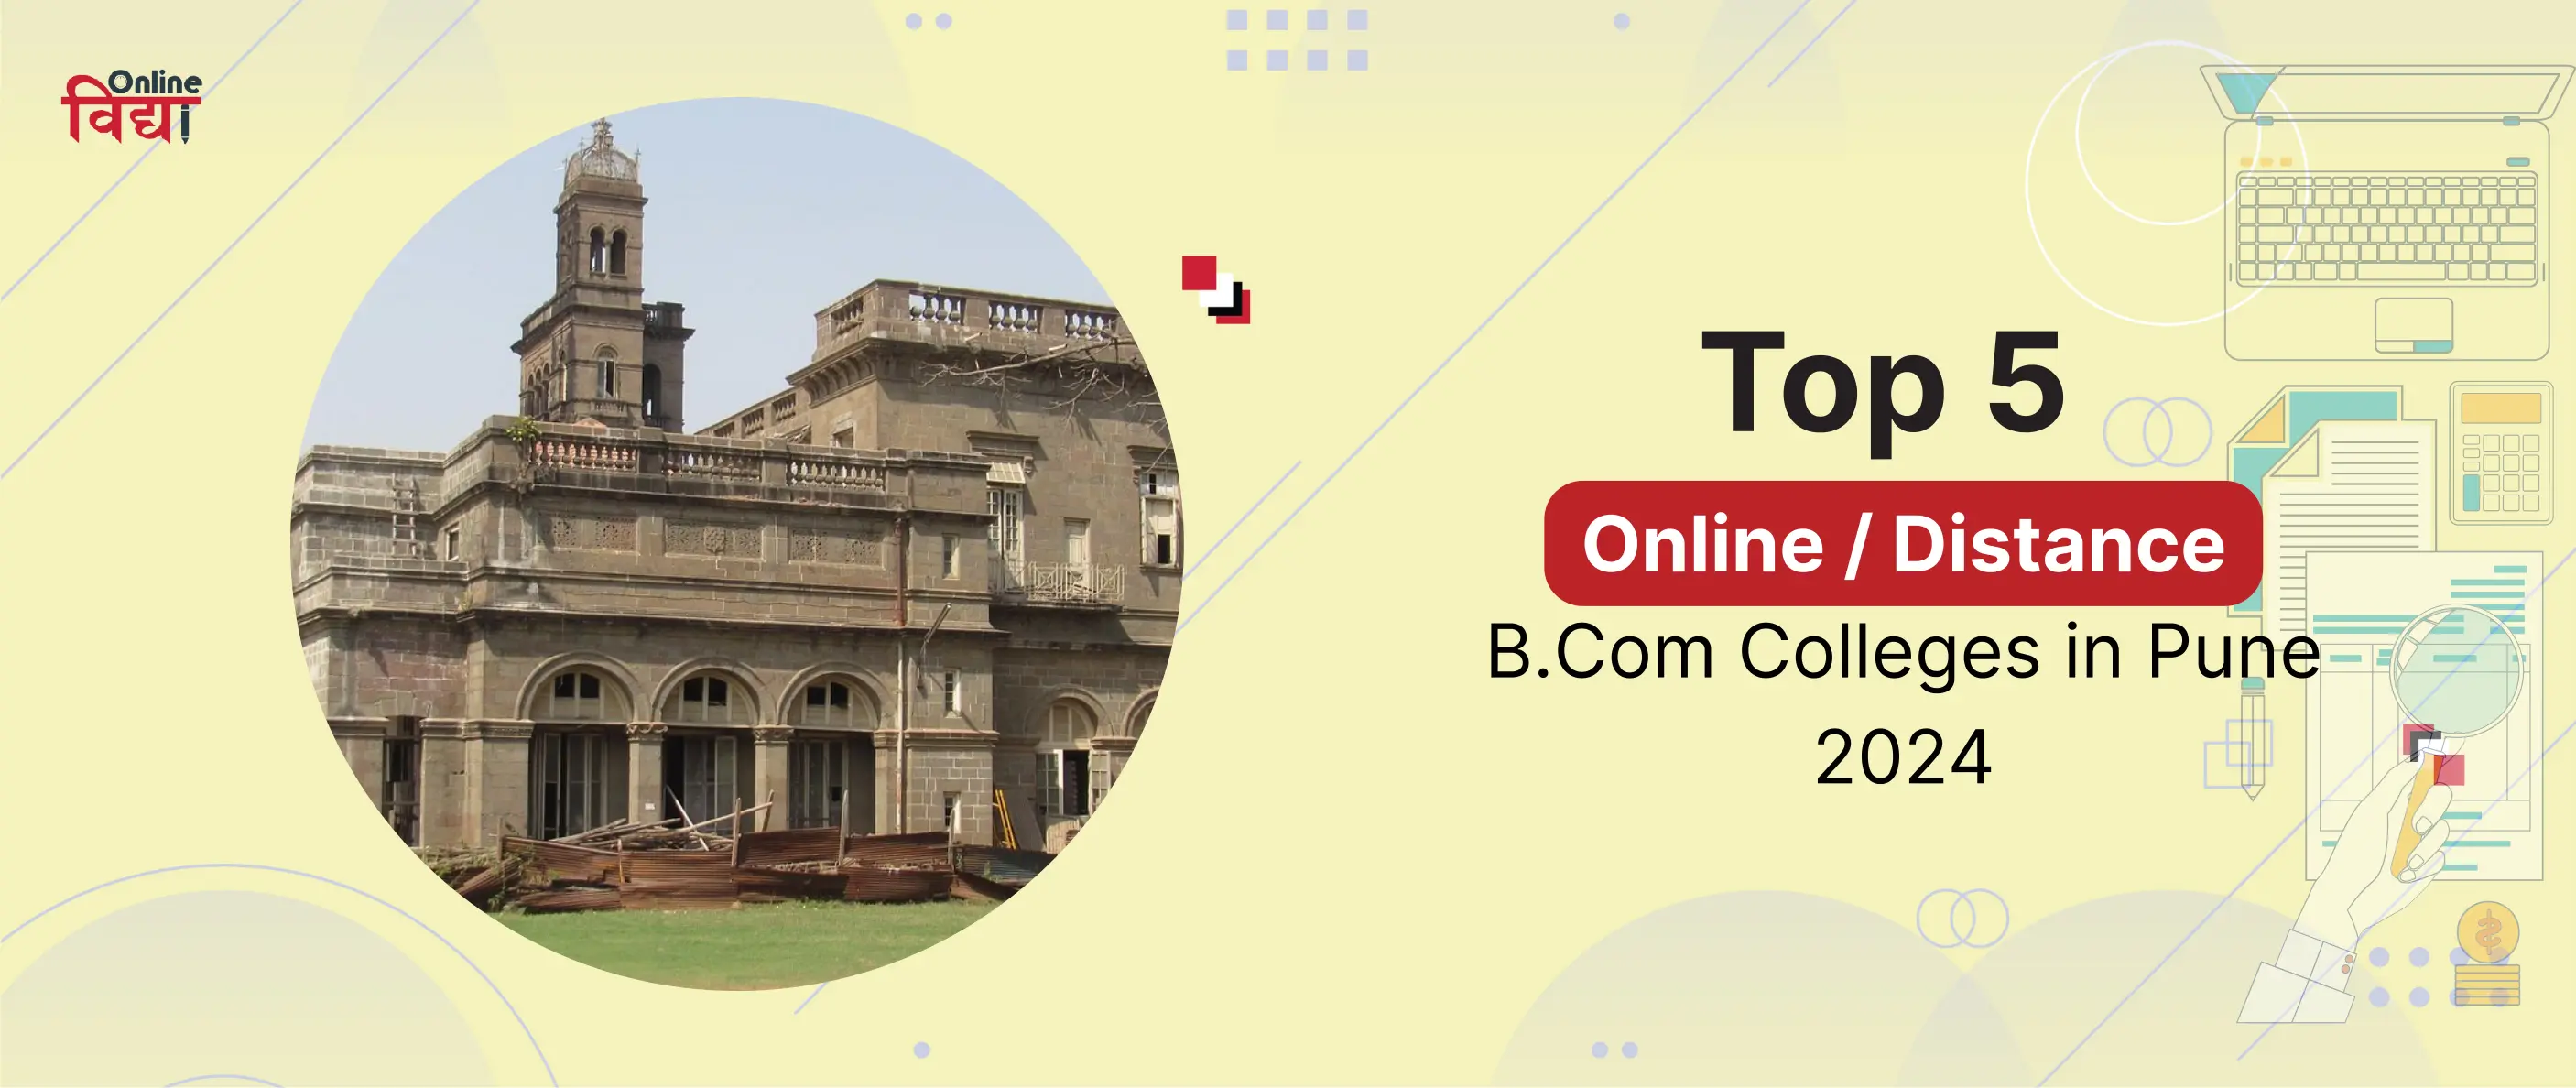 Top 5 Online/ Distance B.Com Colleges in Pune 2024